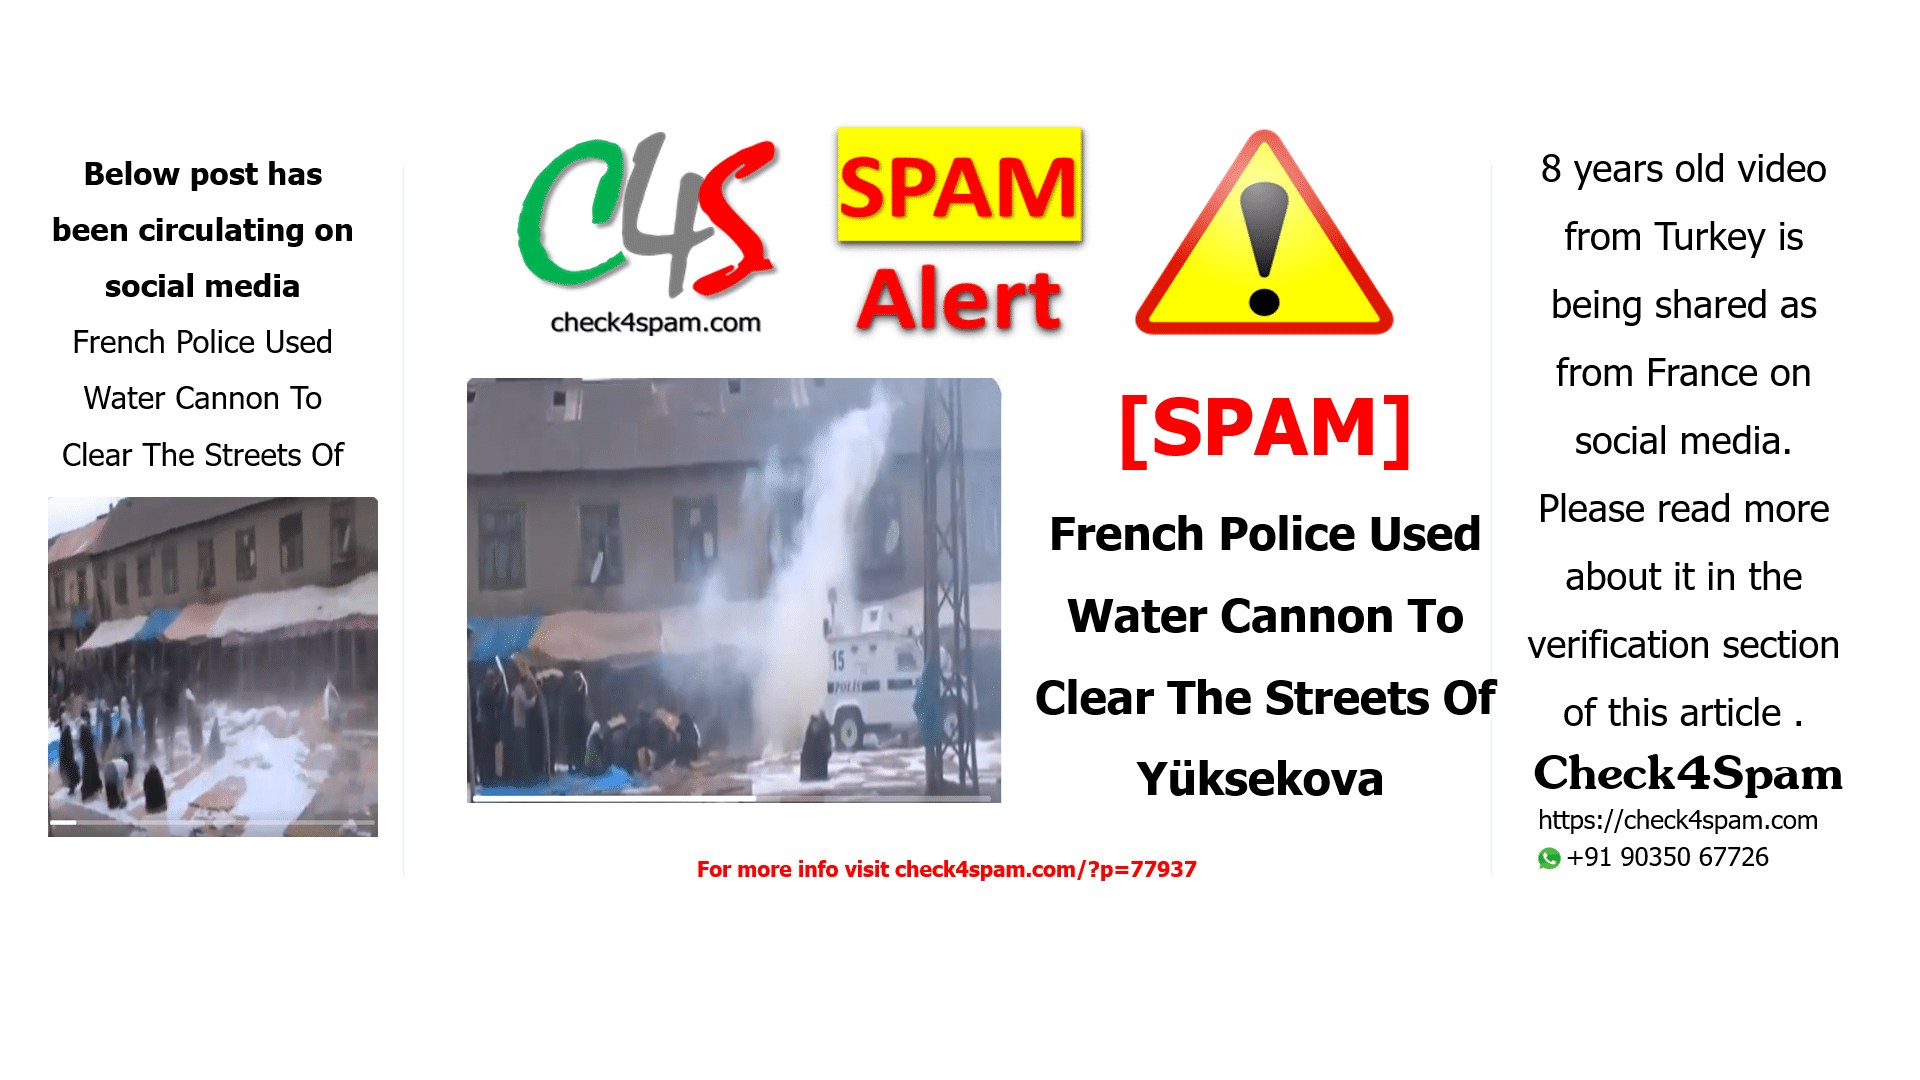 French Police Used Water Cannon To Clear The Streets Of Yüksekova